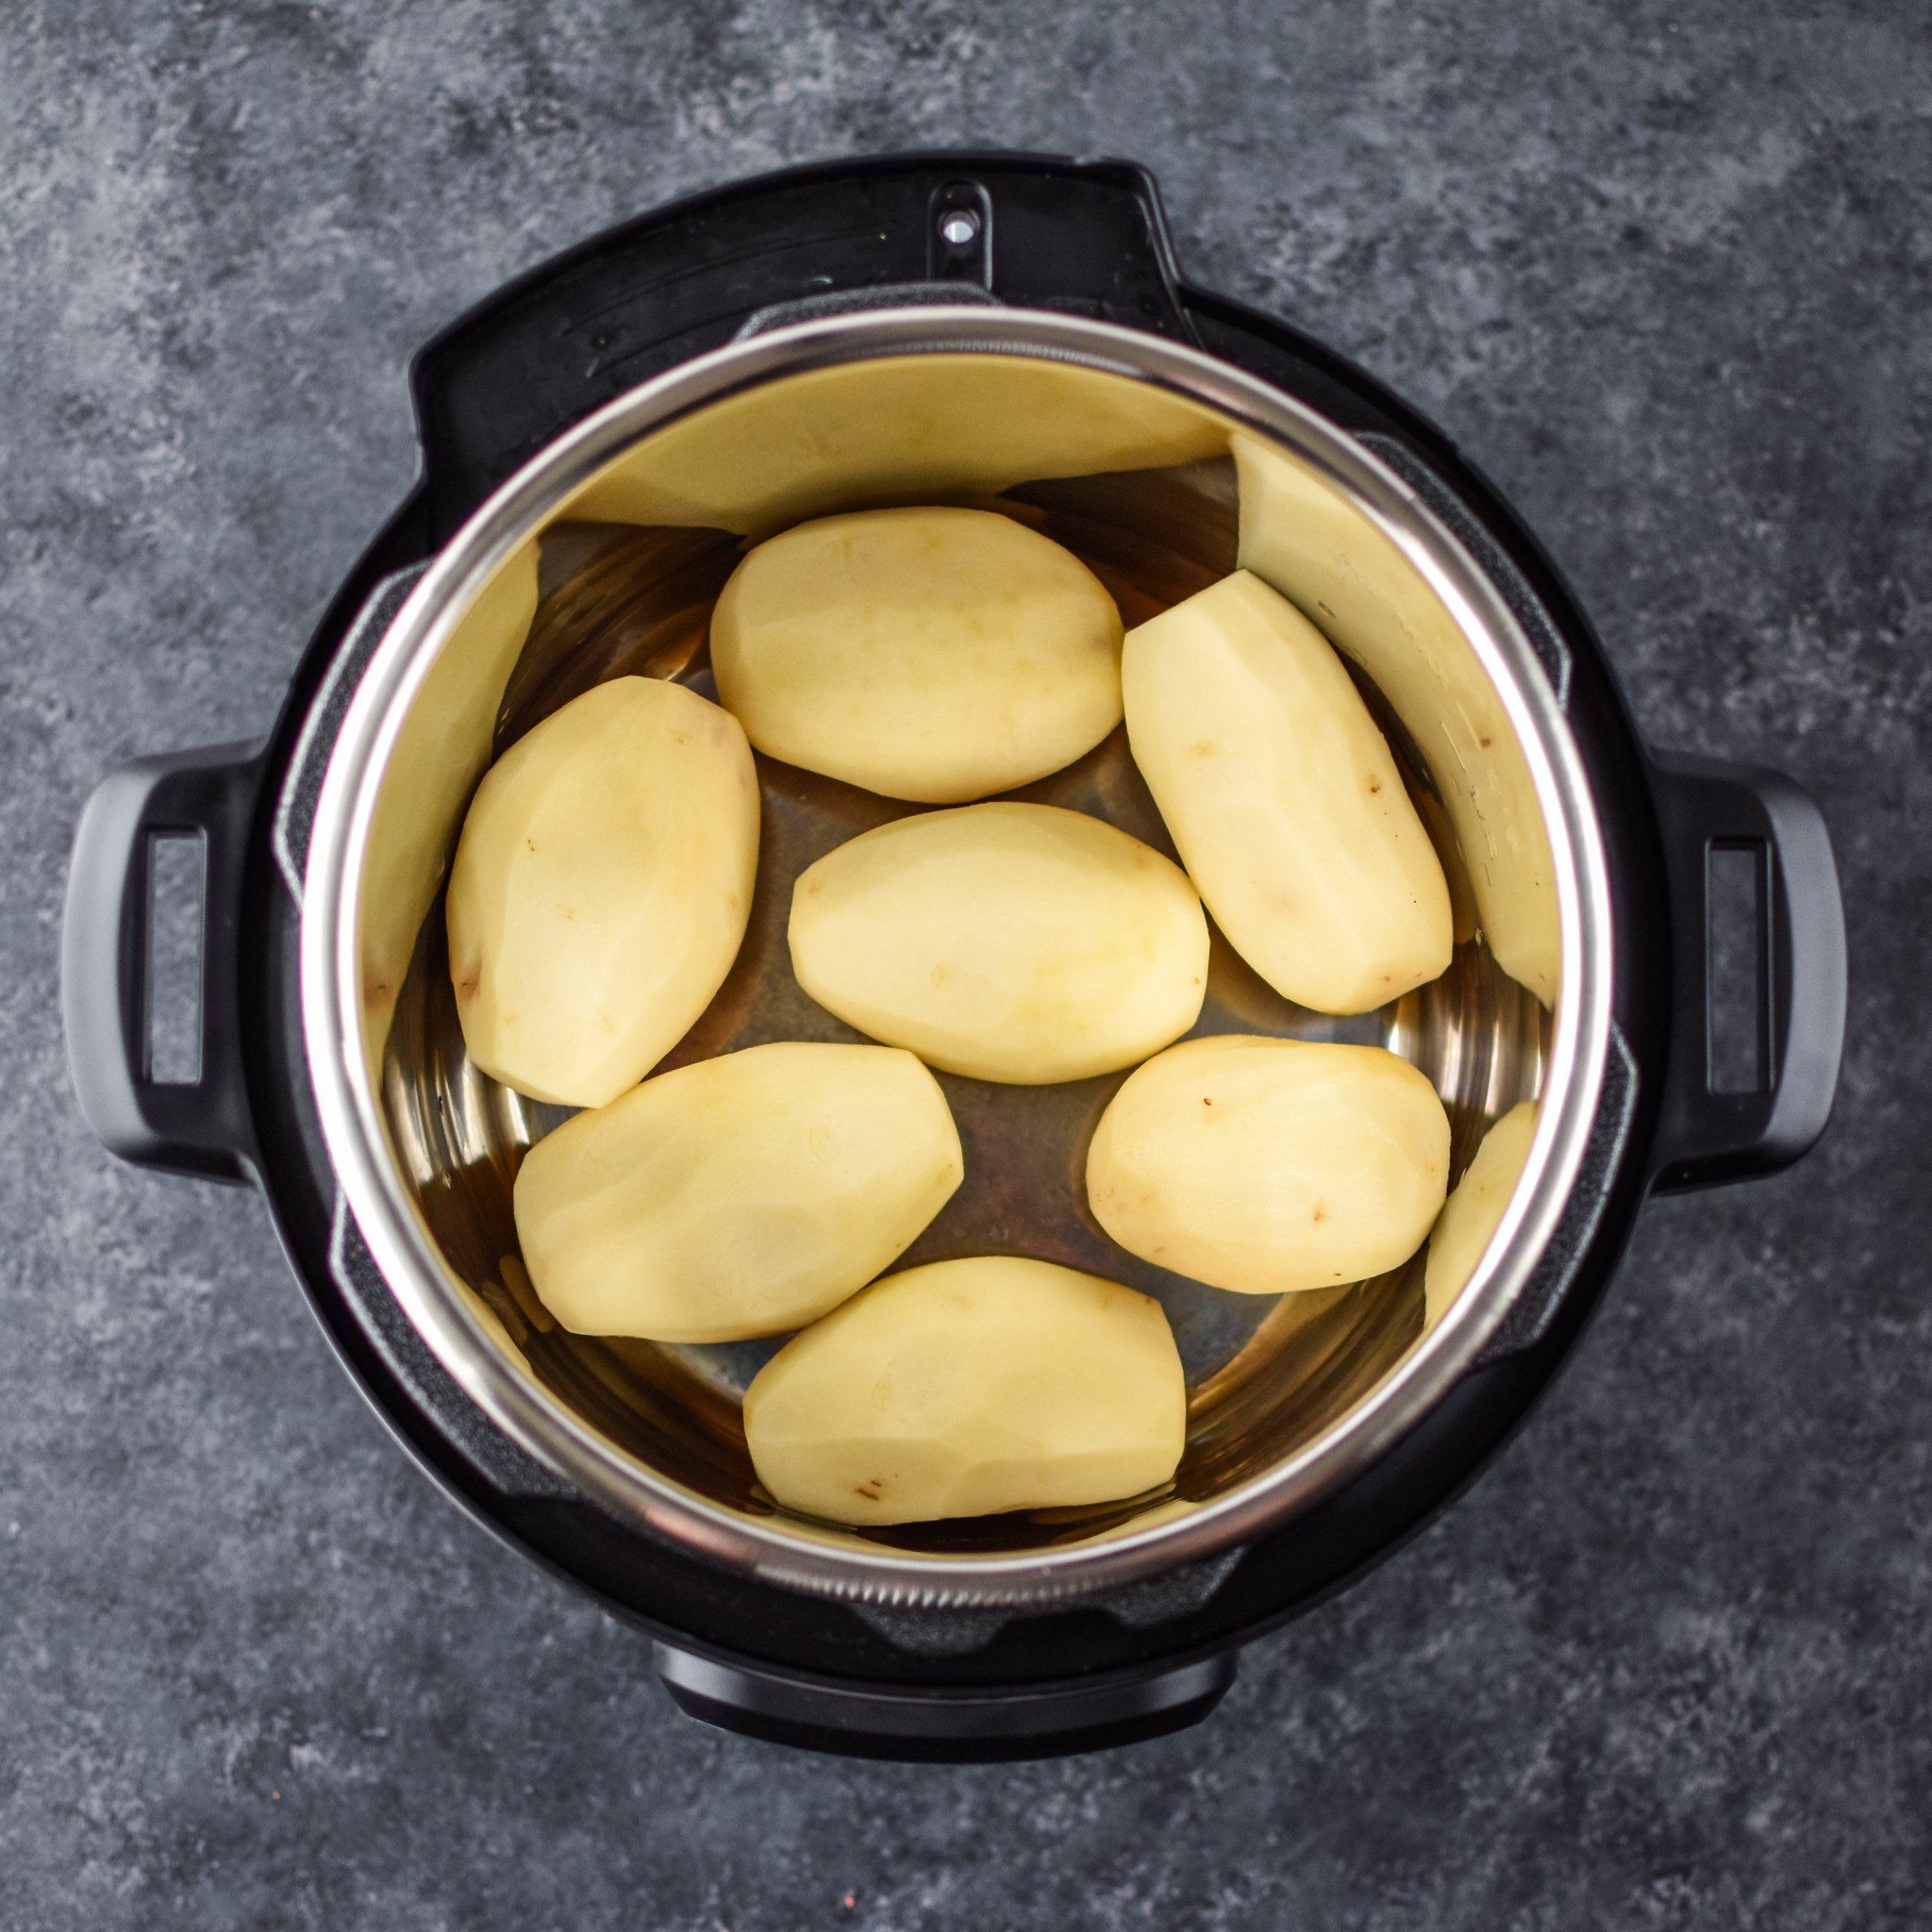 7 russet potatoes peeled in an Instant Pot ready to be cooked.